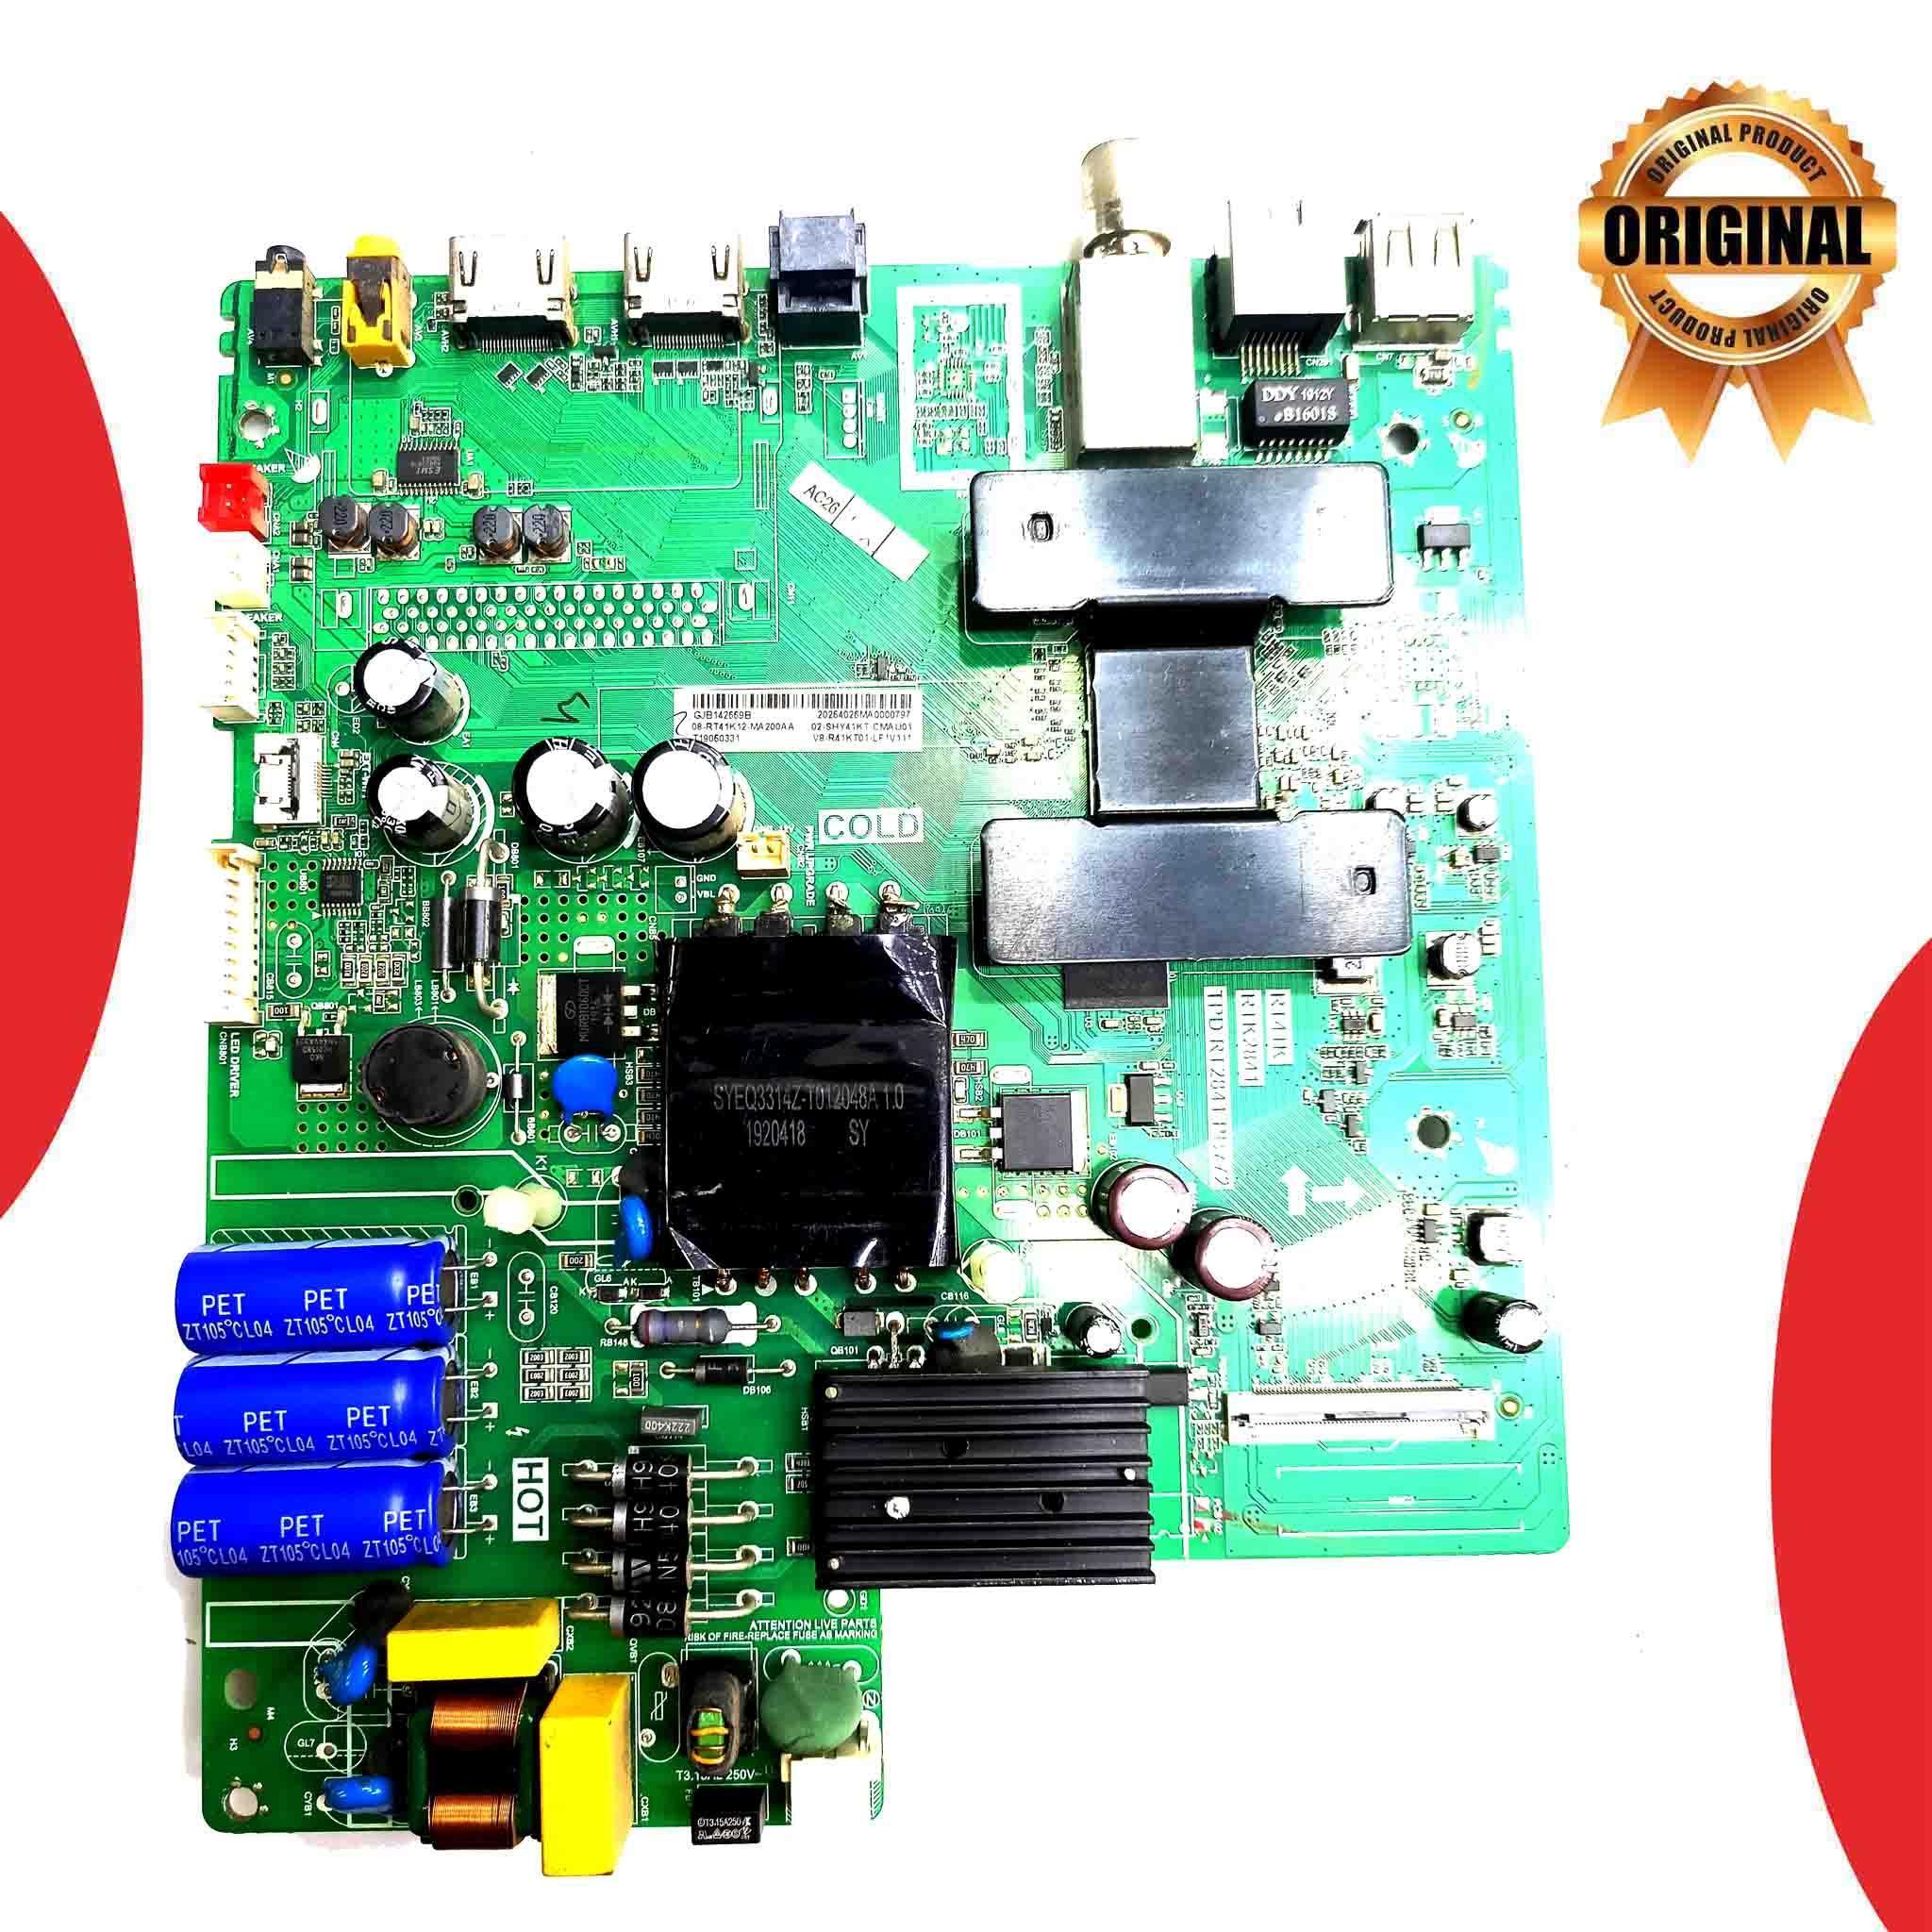 iFFALCON 40 inch LED TV Motherboard for Model 40F2AH - Great Bharat Electronics